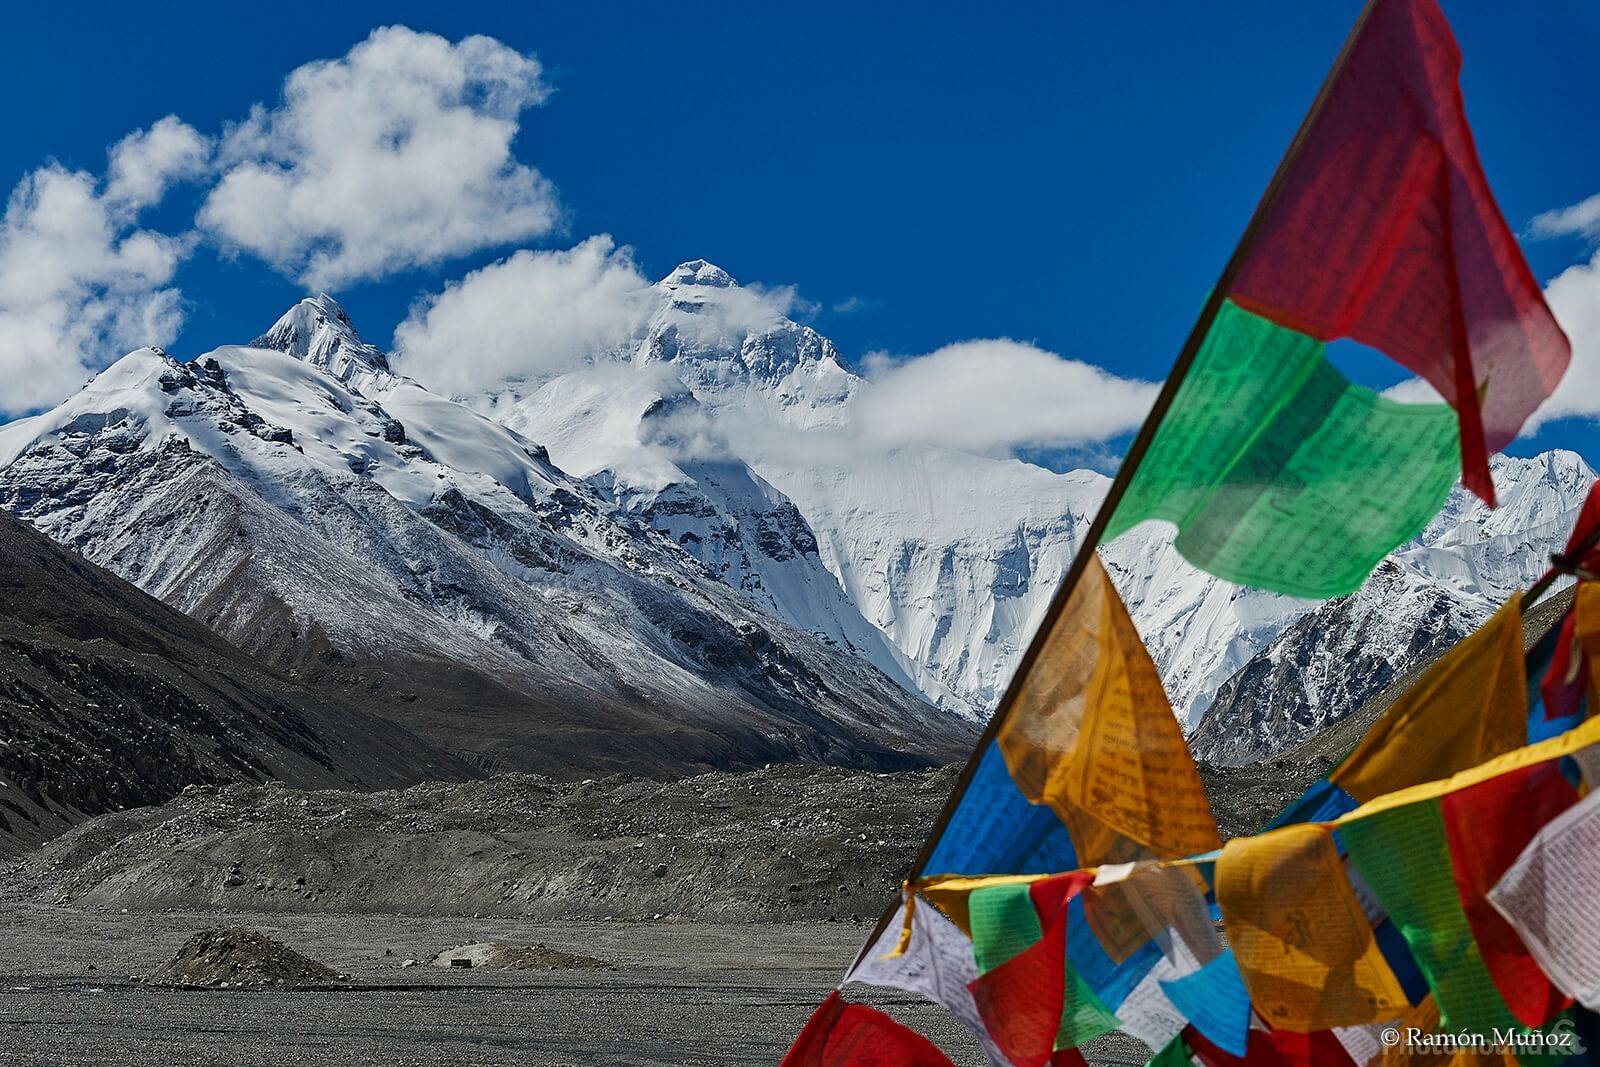 Image of Mount Everest from Base Camp in Tibet by Ramón Muñoz